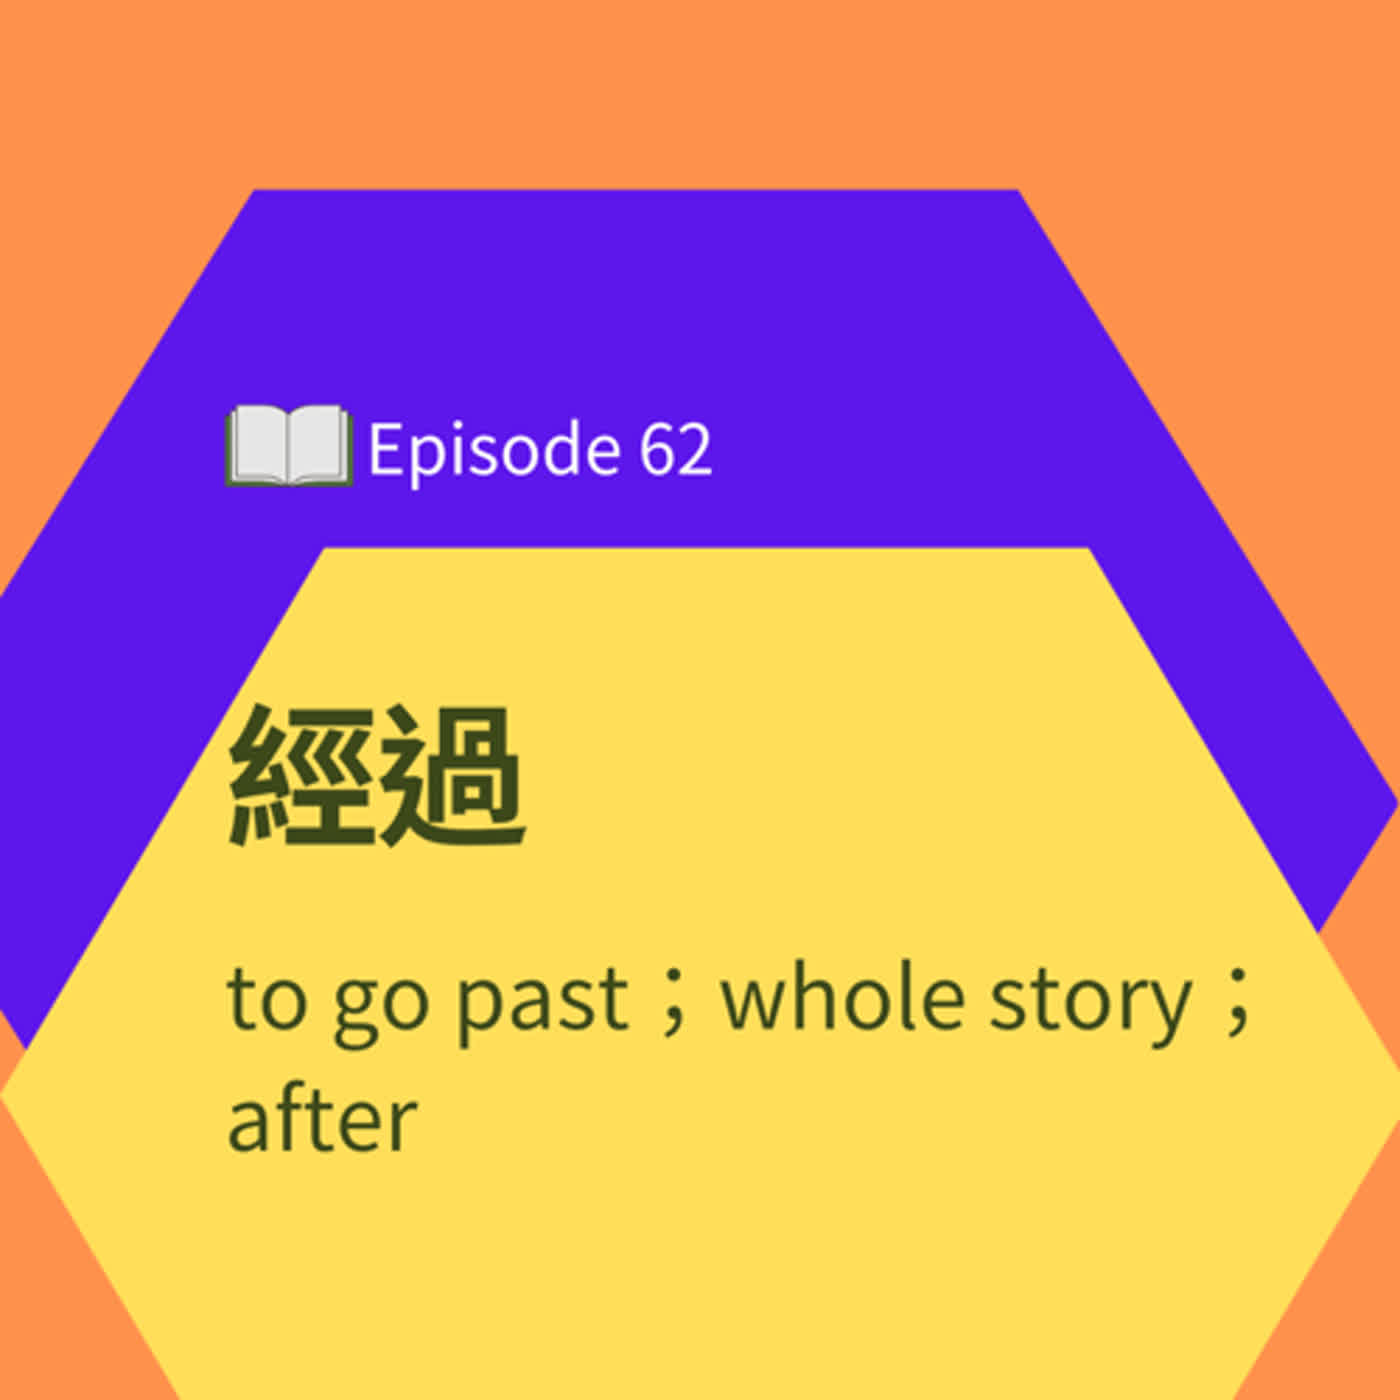 EP62 l 經過to go past；after；whole story